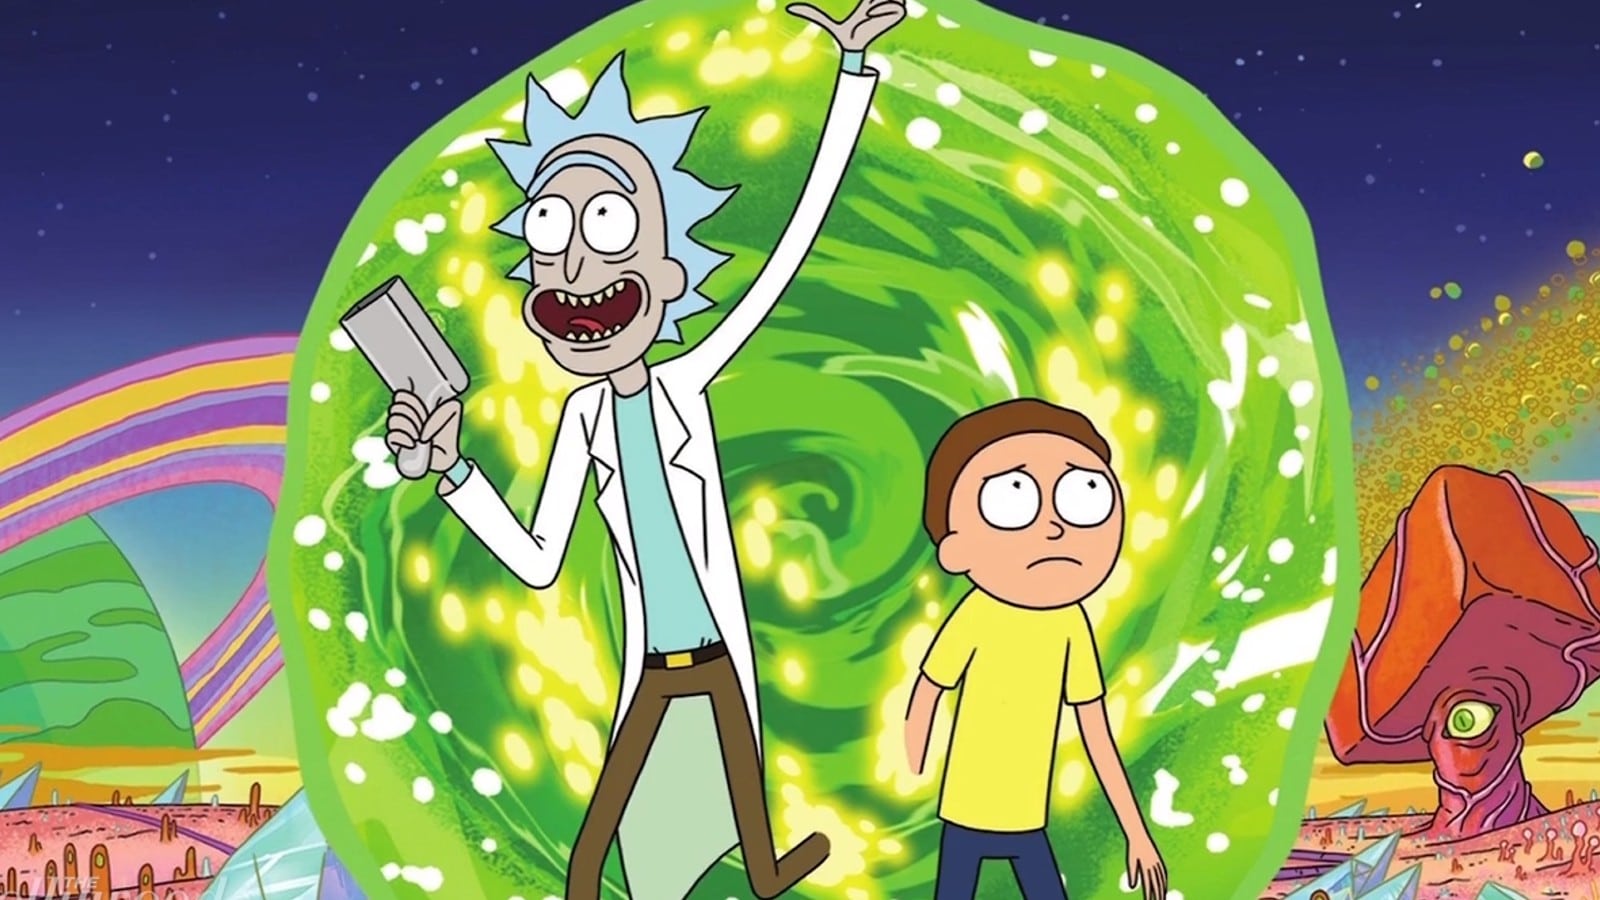 Rick and Morty won't be ending schwiftly - according to the creato...